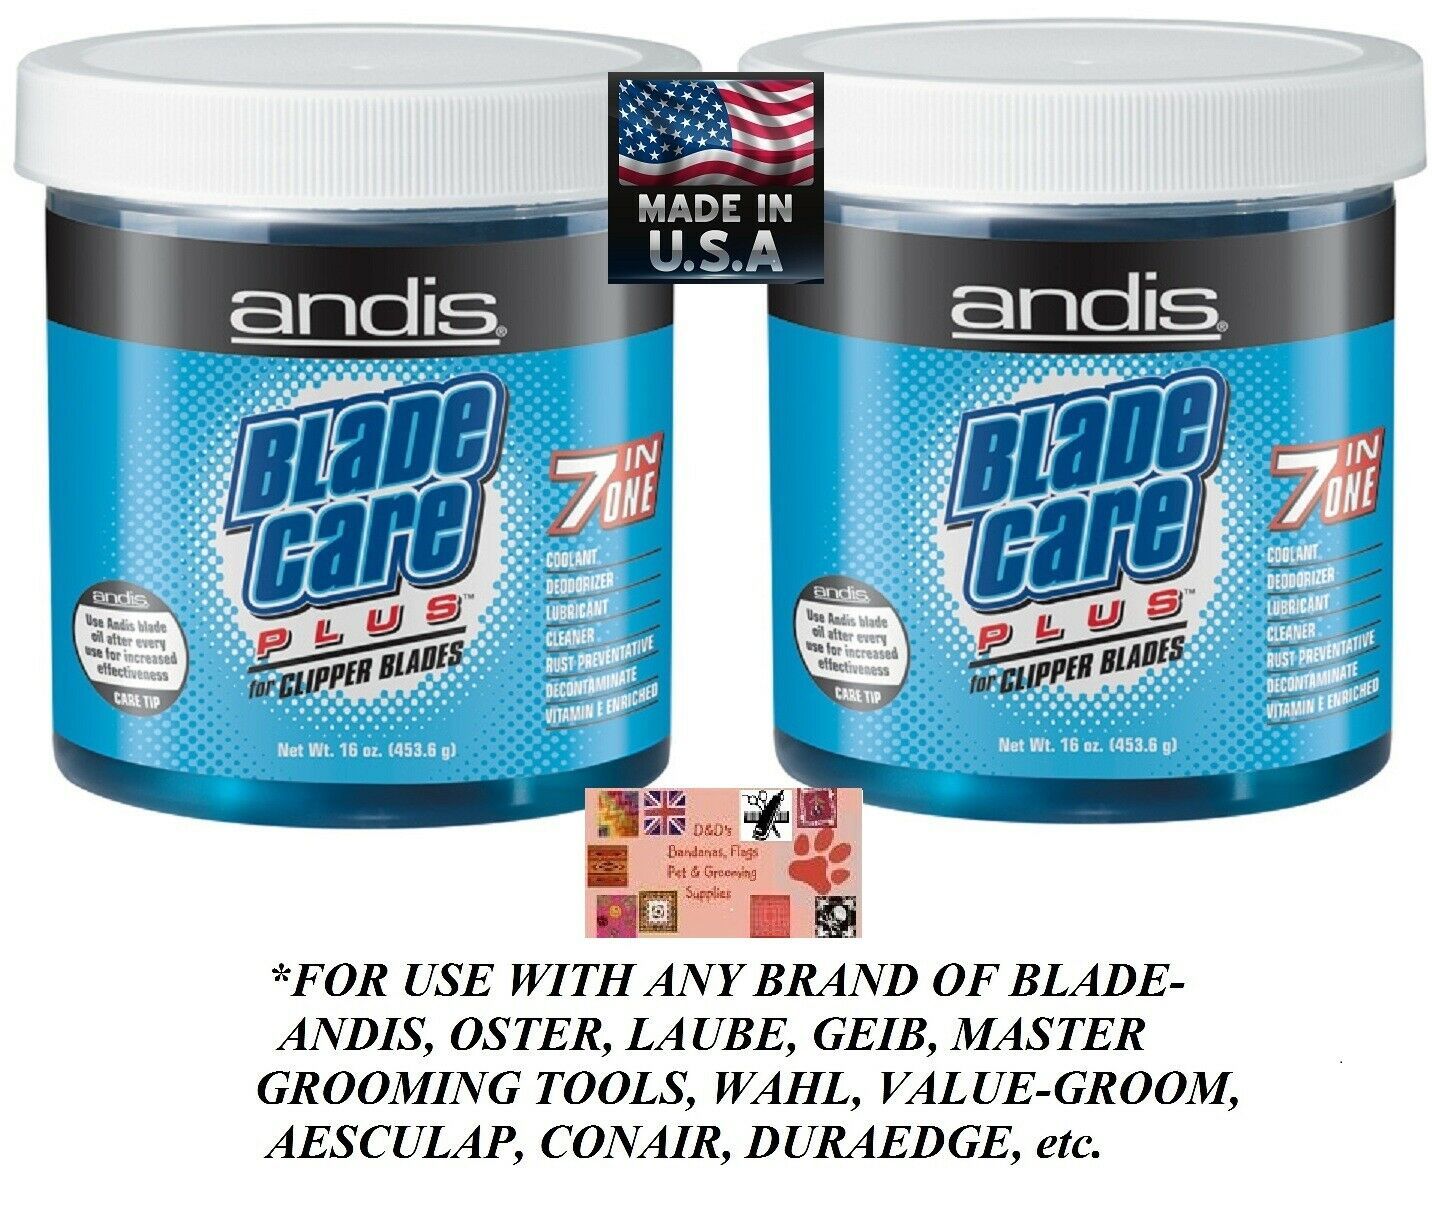 2-ANDIS 7 in ONE CLIPPER BLADE CARE DIP/WASH Cleaner,Coolant,Lube*Also For Oster